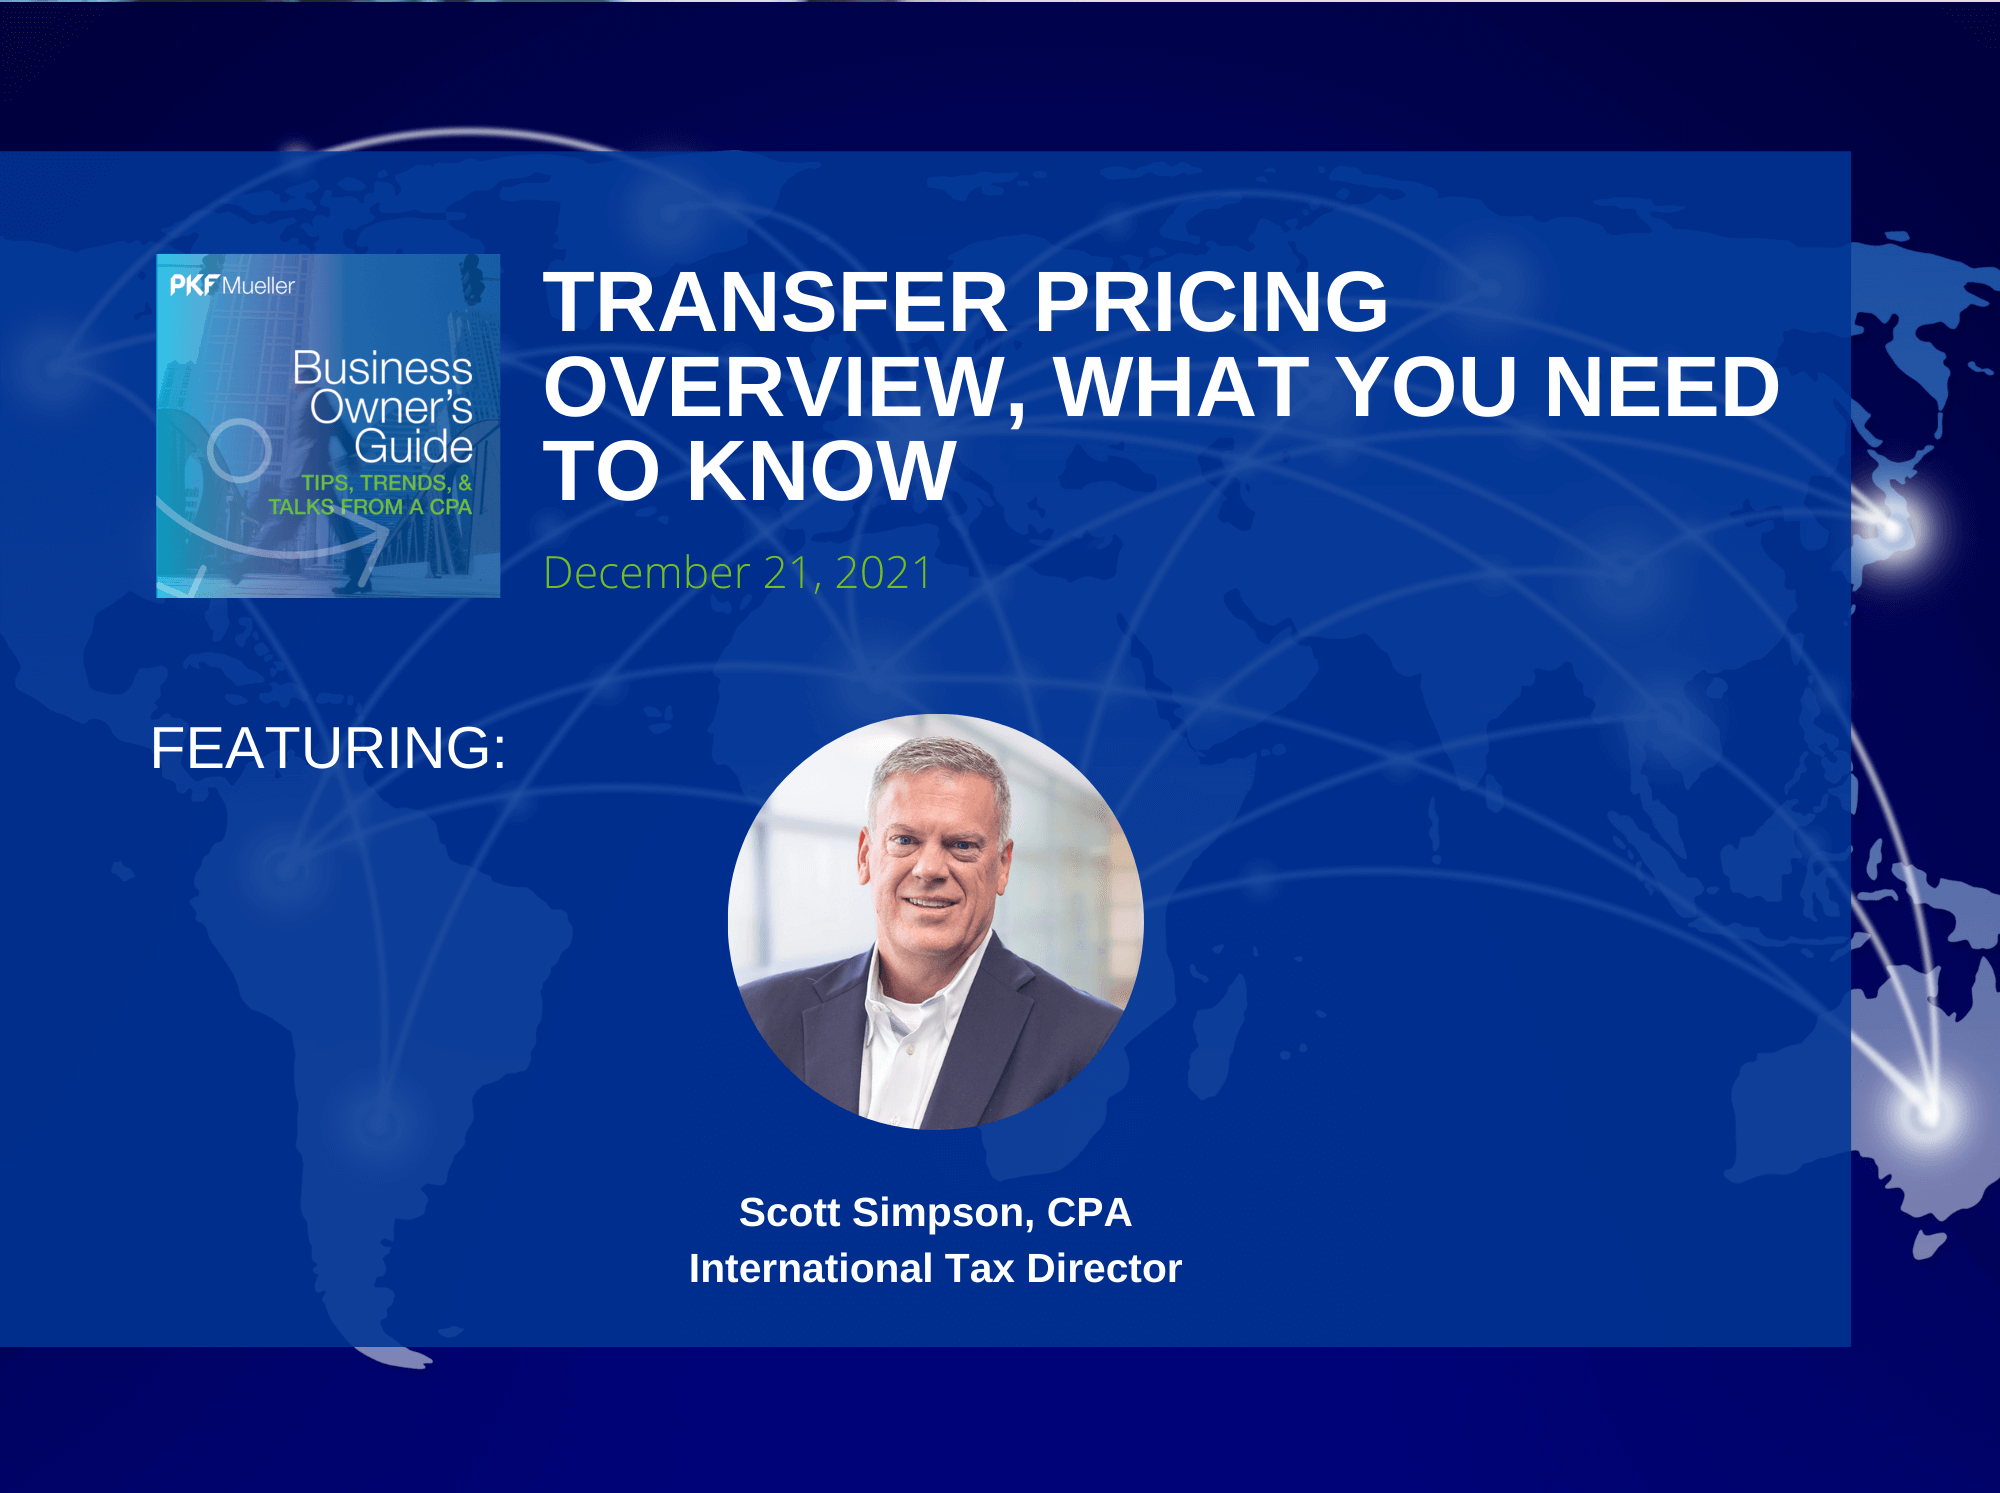 Transfer Pricing: Overview, What You Need to Know